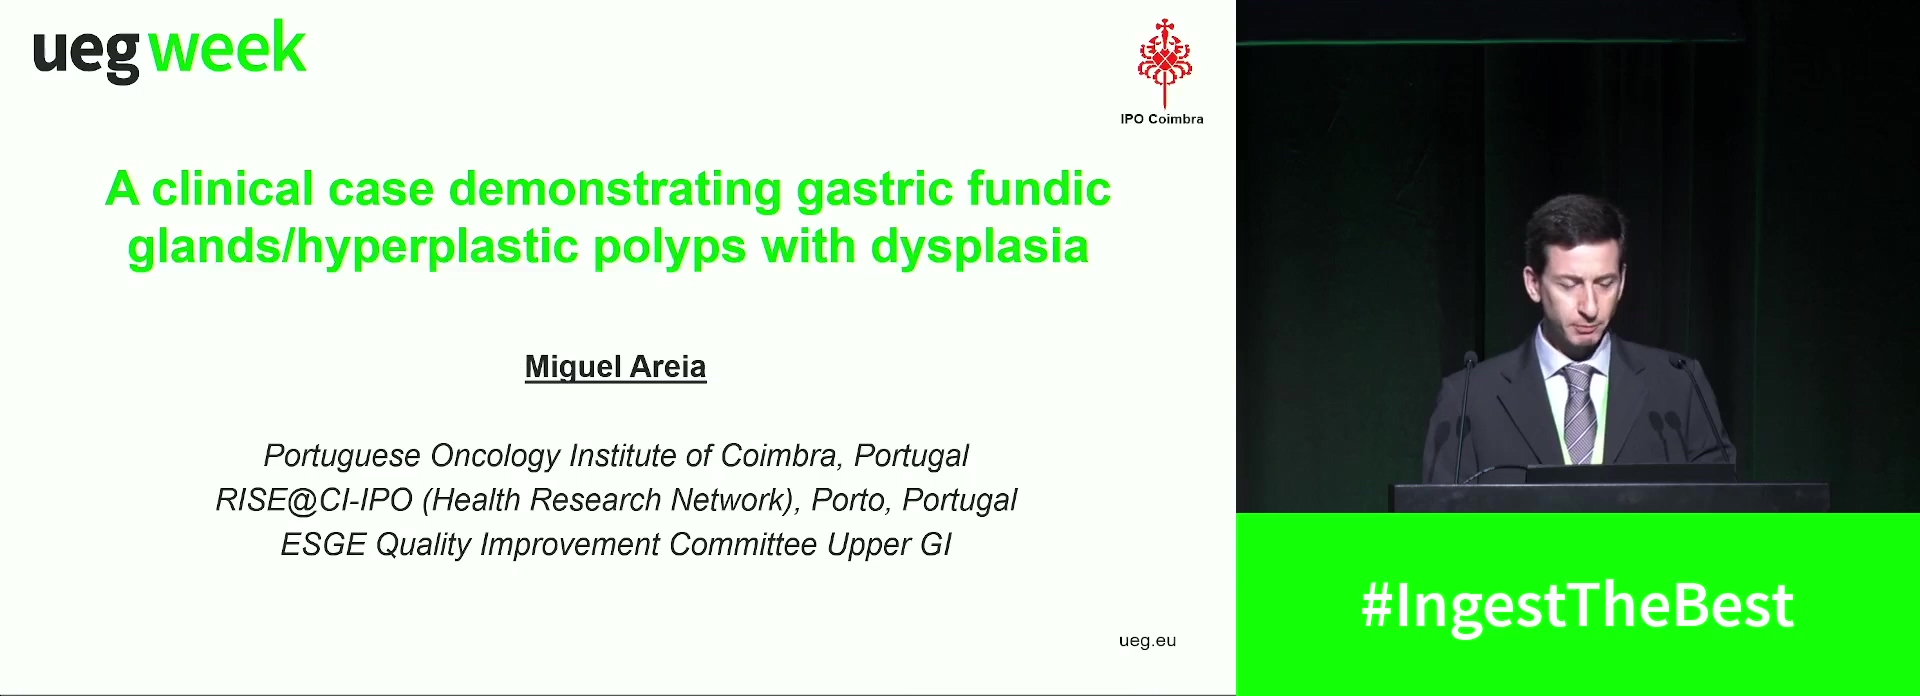 A clinical case demonstrating gastric fundic glands/hyperplastic polyps with dysplasia